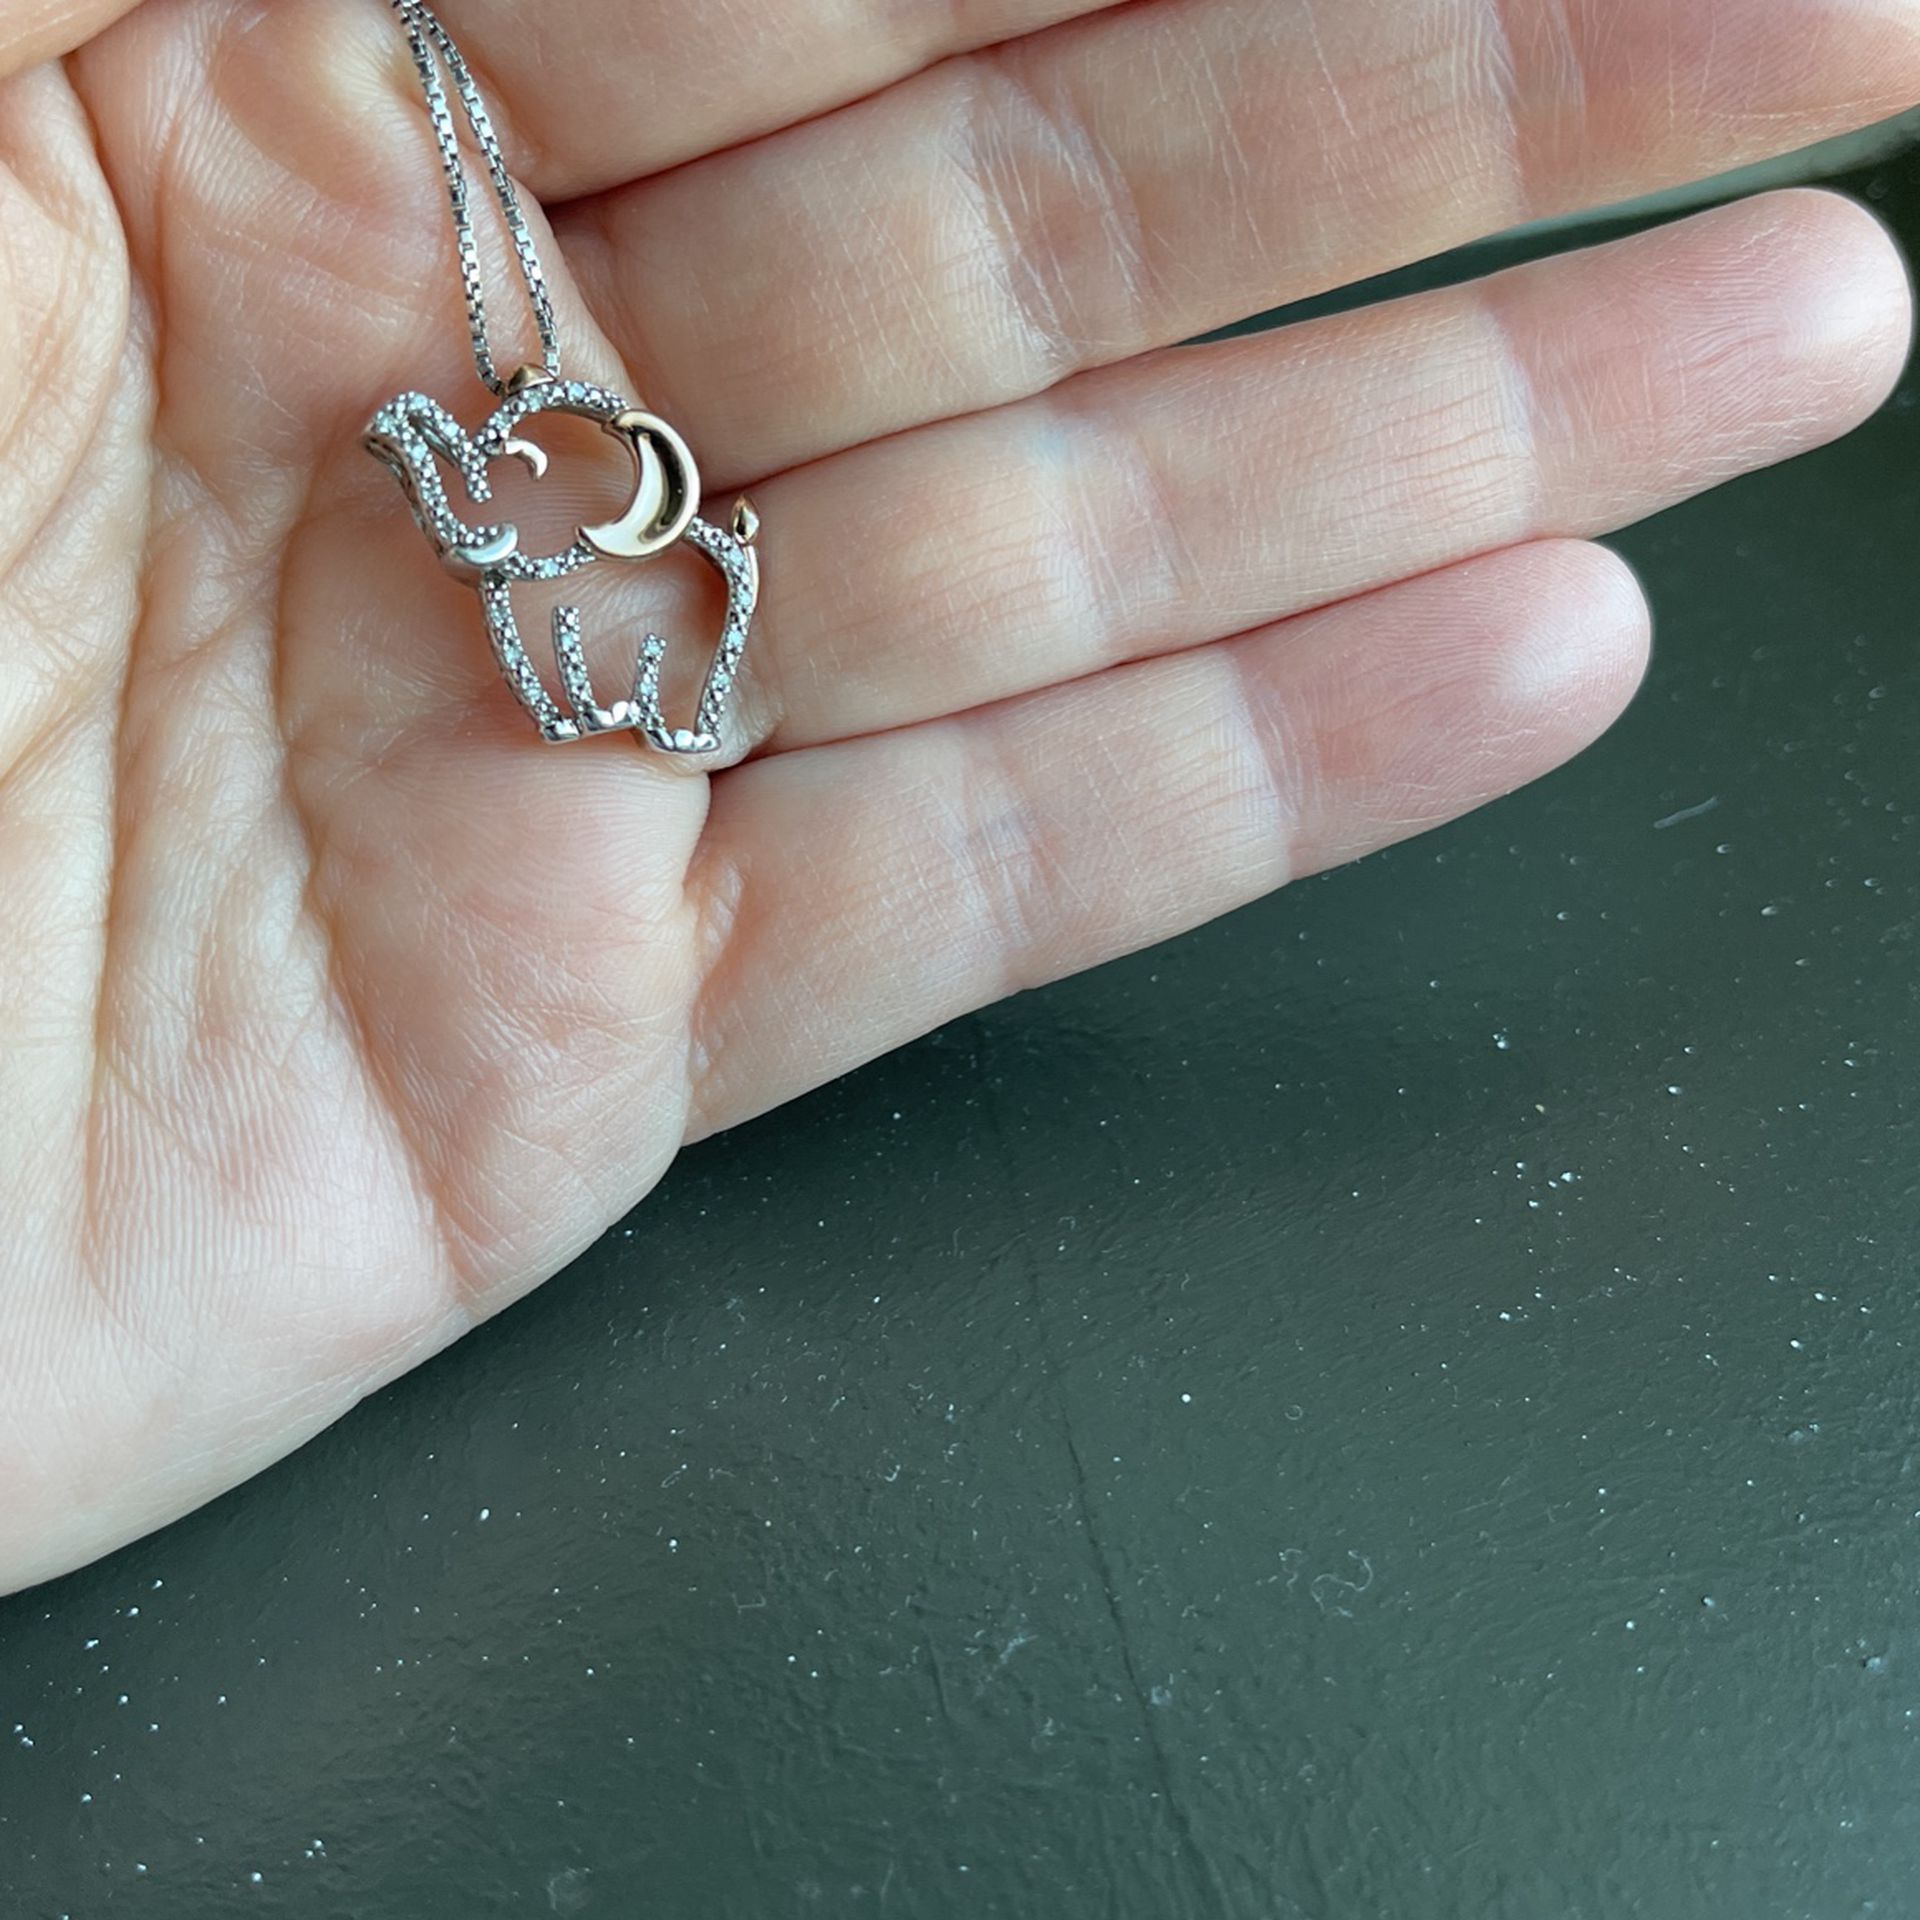 14k Silver And Rose Gold Elephant